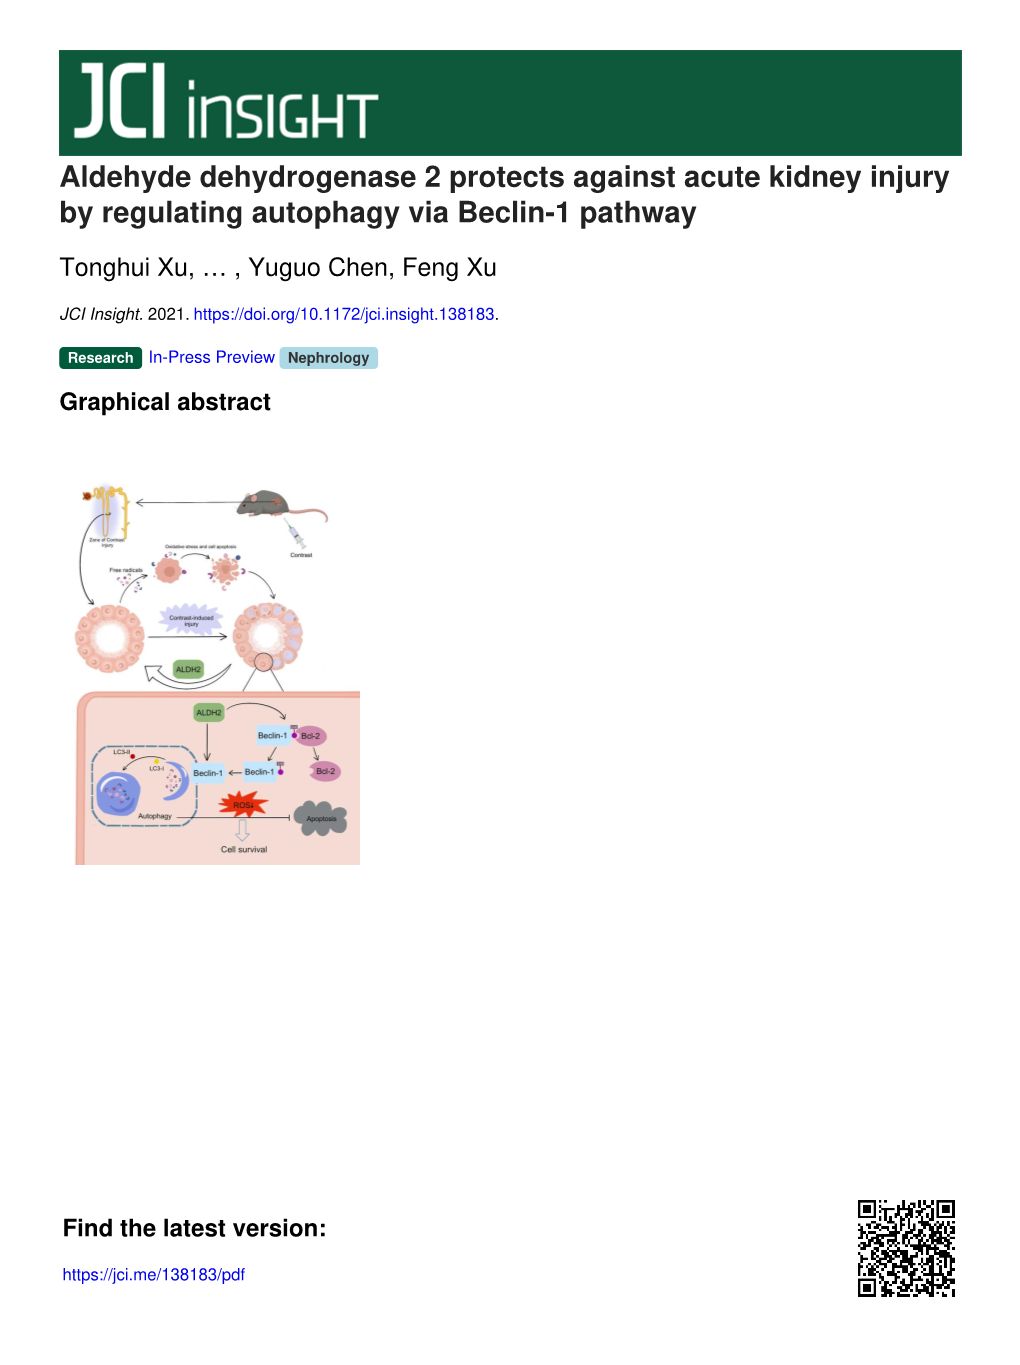 Aldehyde Dehydrogenase 2 Protects Against Acute Kidney Injury by Regulating Autophagy Via Beclin-1 Pathway